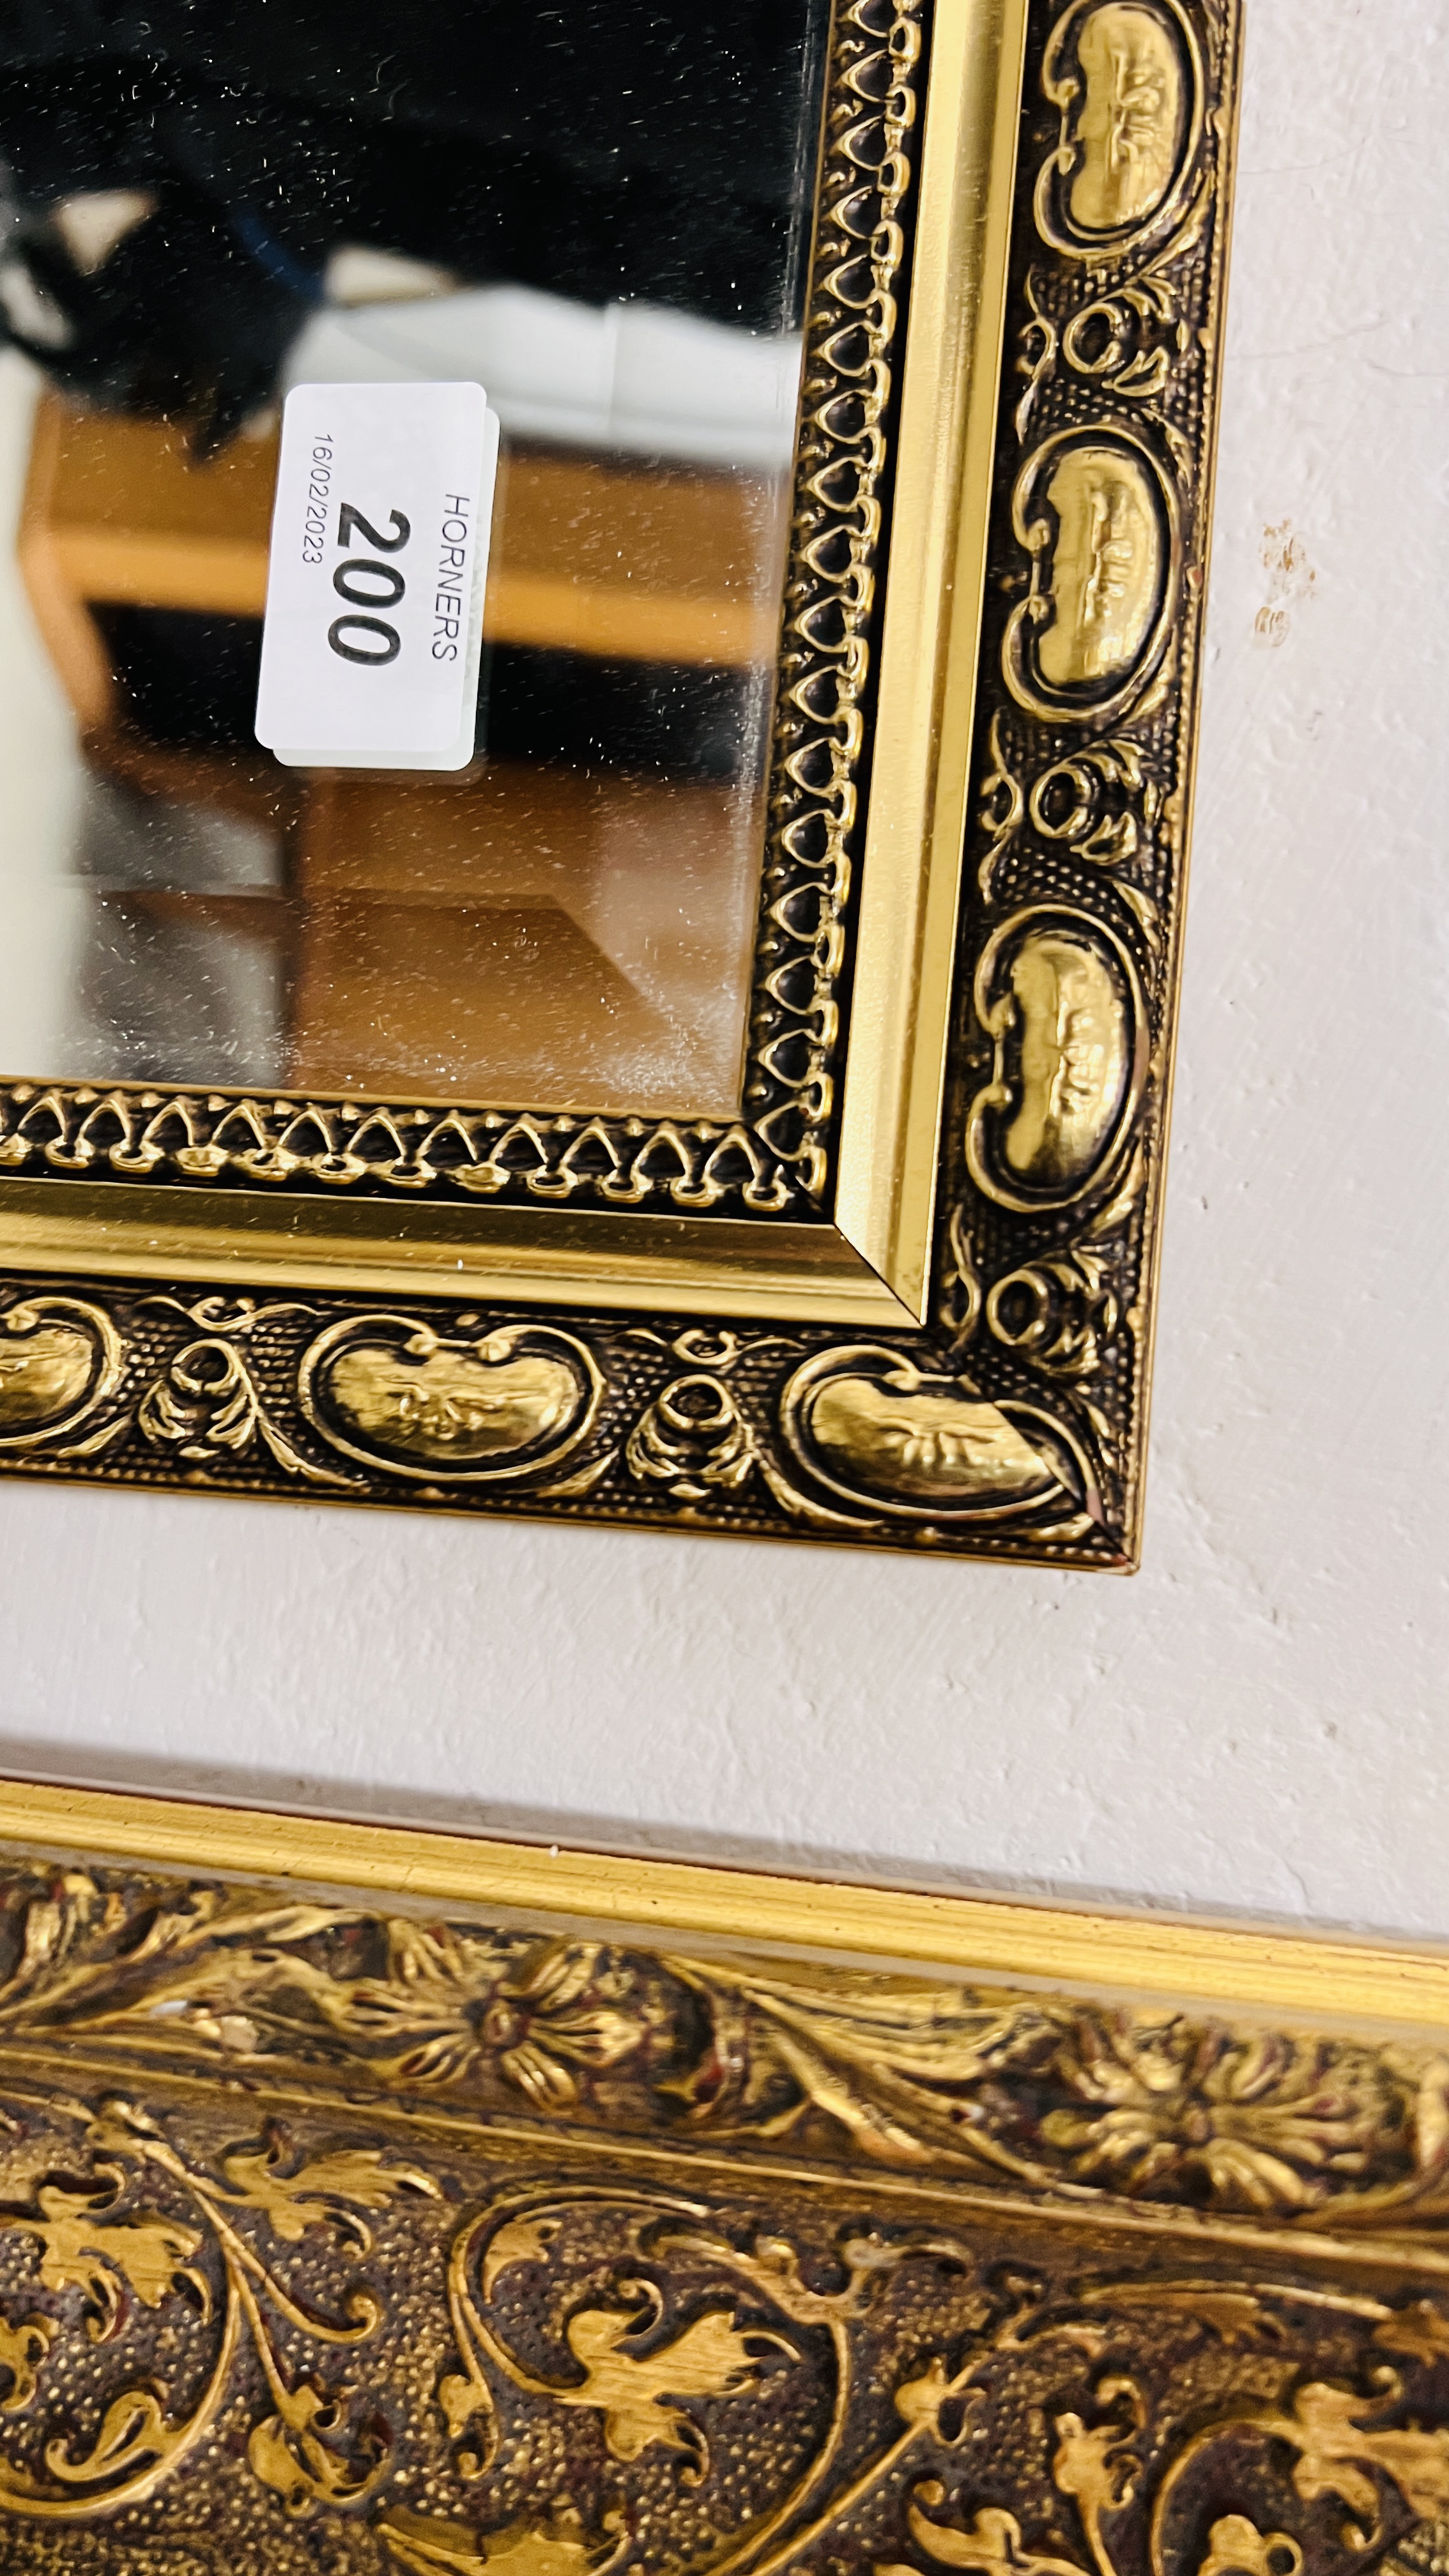 2 X GILT FRAMED WALL MIRRORS WITH BEVELLED GLASS PLATES 90 X 64CMM AND 83 X 58CM. - Image 5 of 7